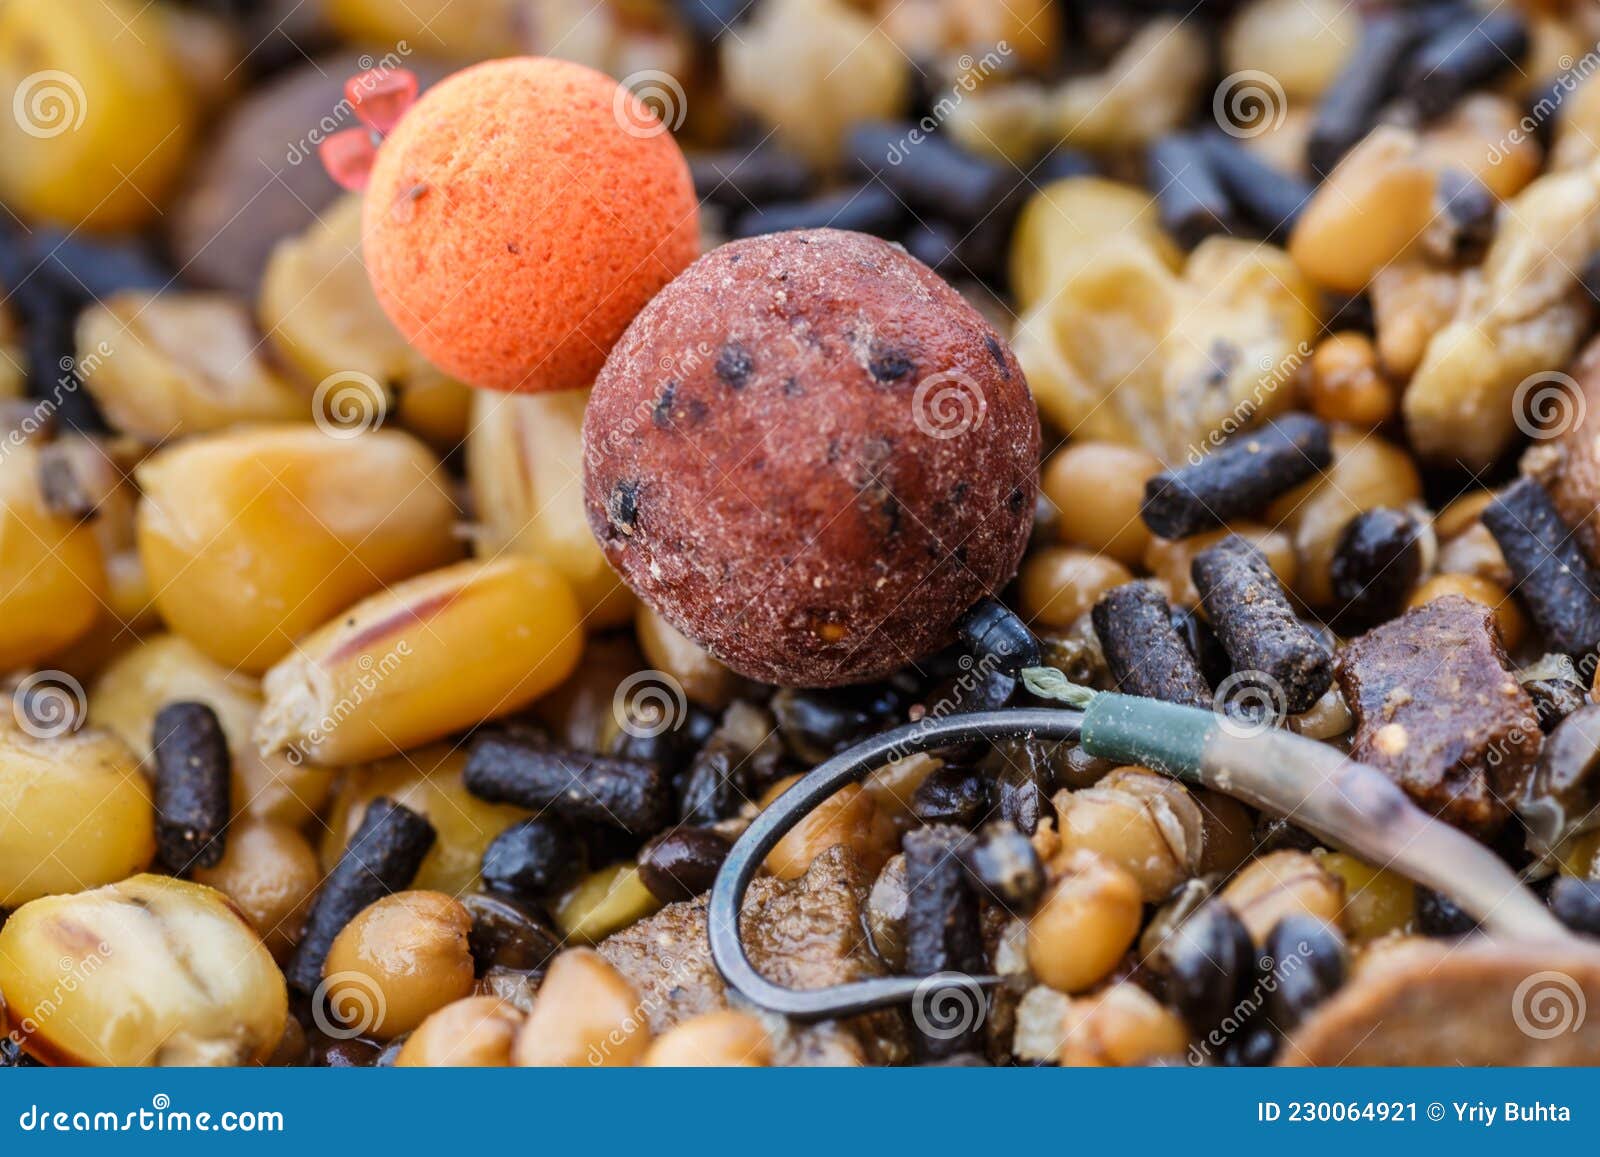 Carp Fishing Chod Rig.the Source Boilies with Fishing Hook. Fishing Rig for  Carps,Carp Boilies, Corn, Tiger Nuts and Hemp Stock Image - Image of  pellets, hobby: 230064921